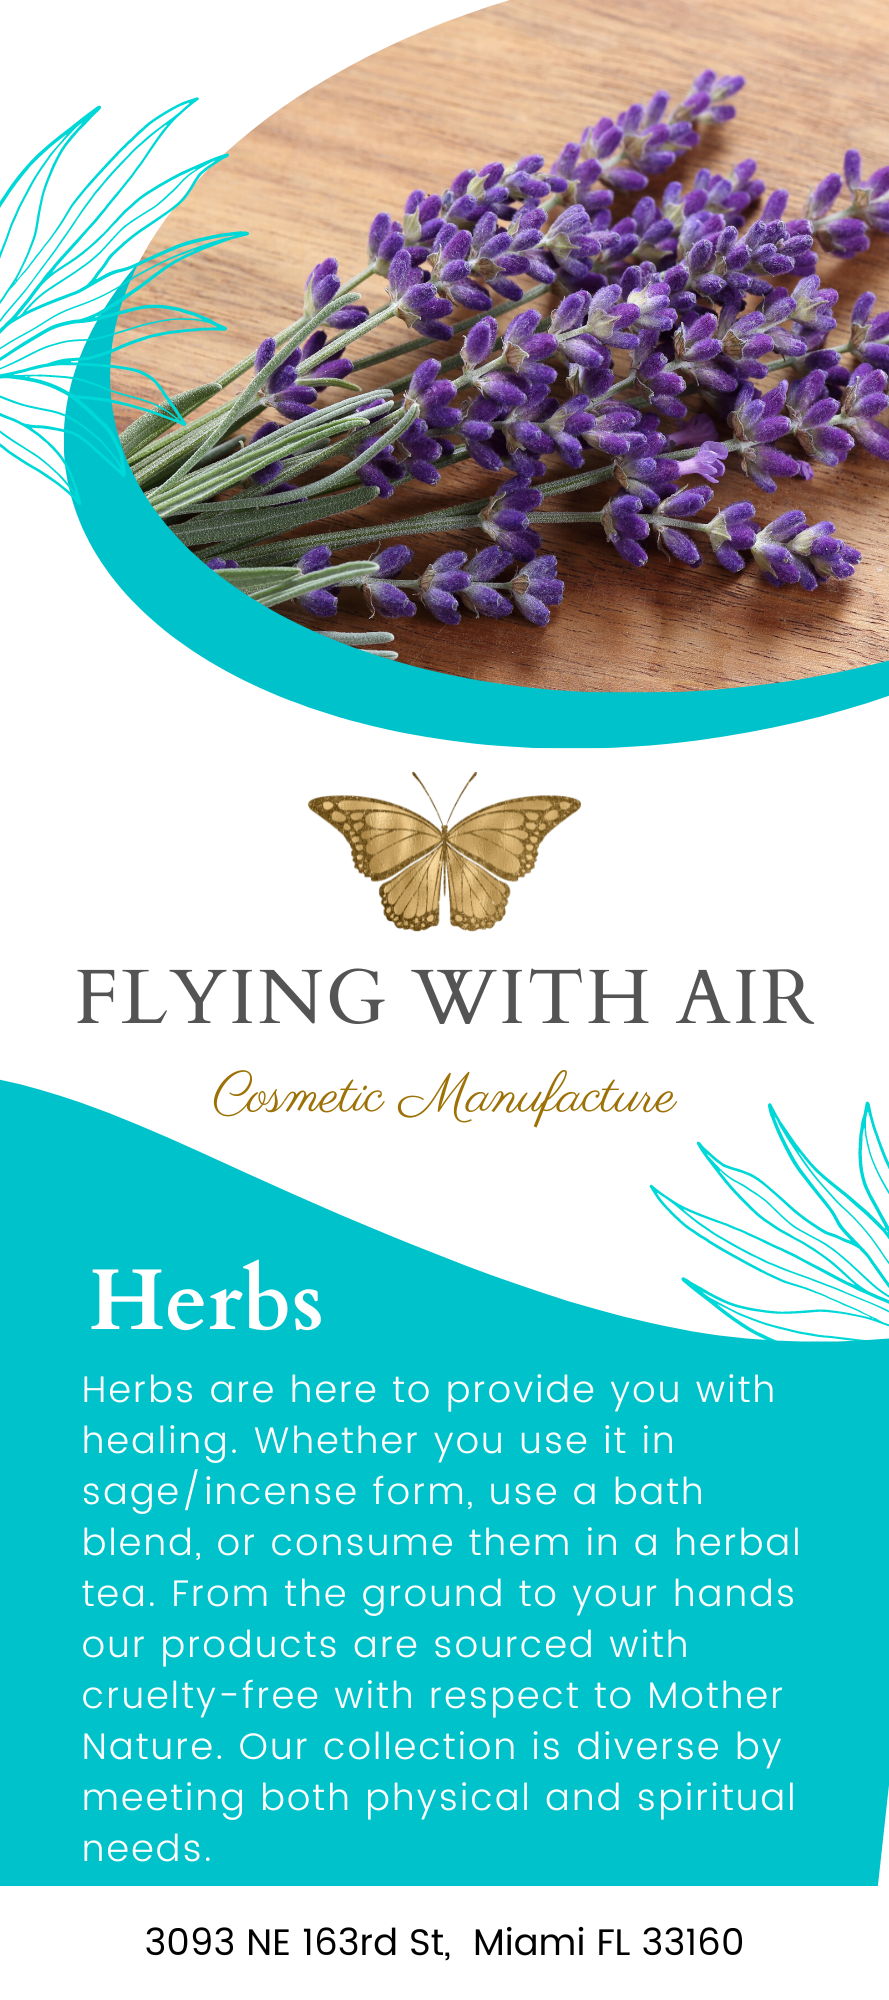 Flying with Air Rack Card Set of 10 - Herbs